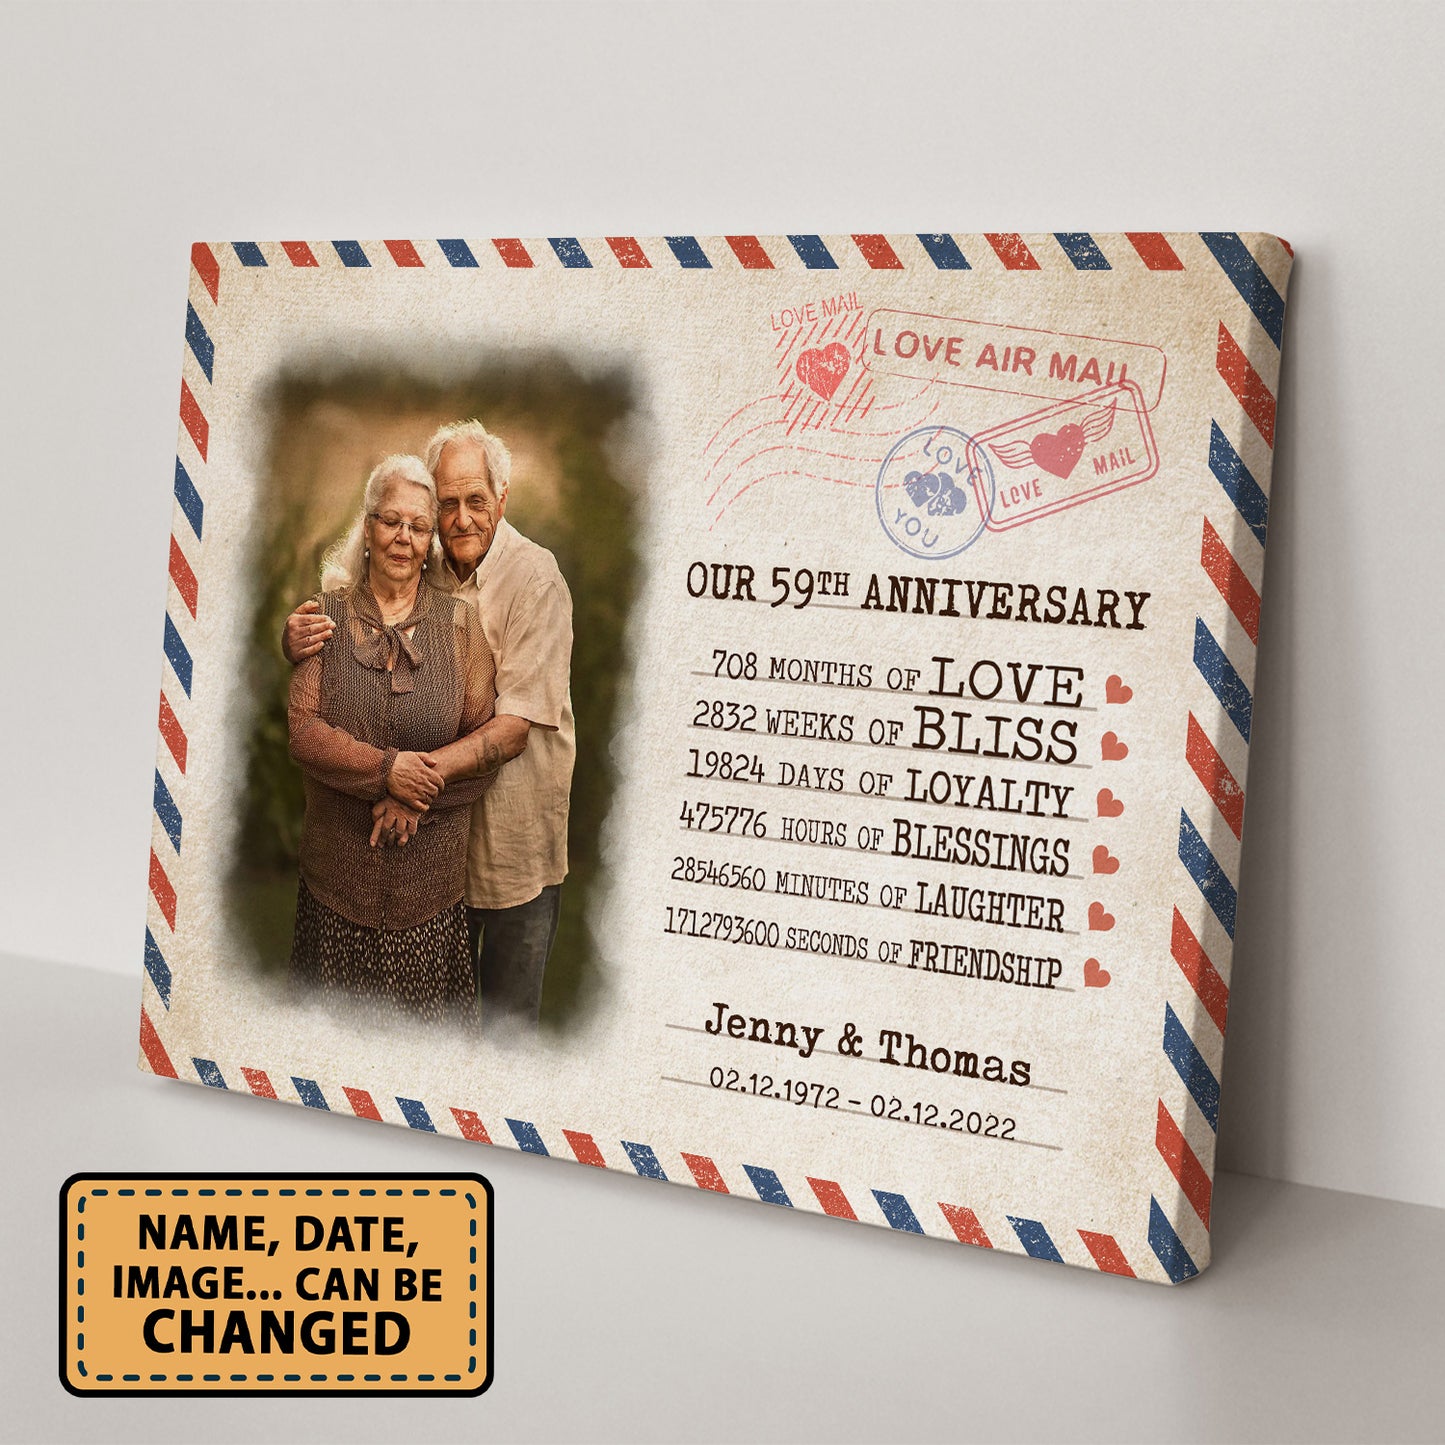 Our 59th Anniversary Letter Valentine Gift Personalized Canvas